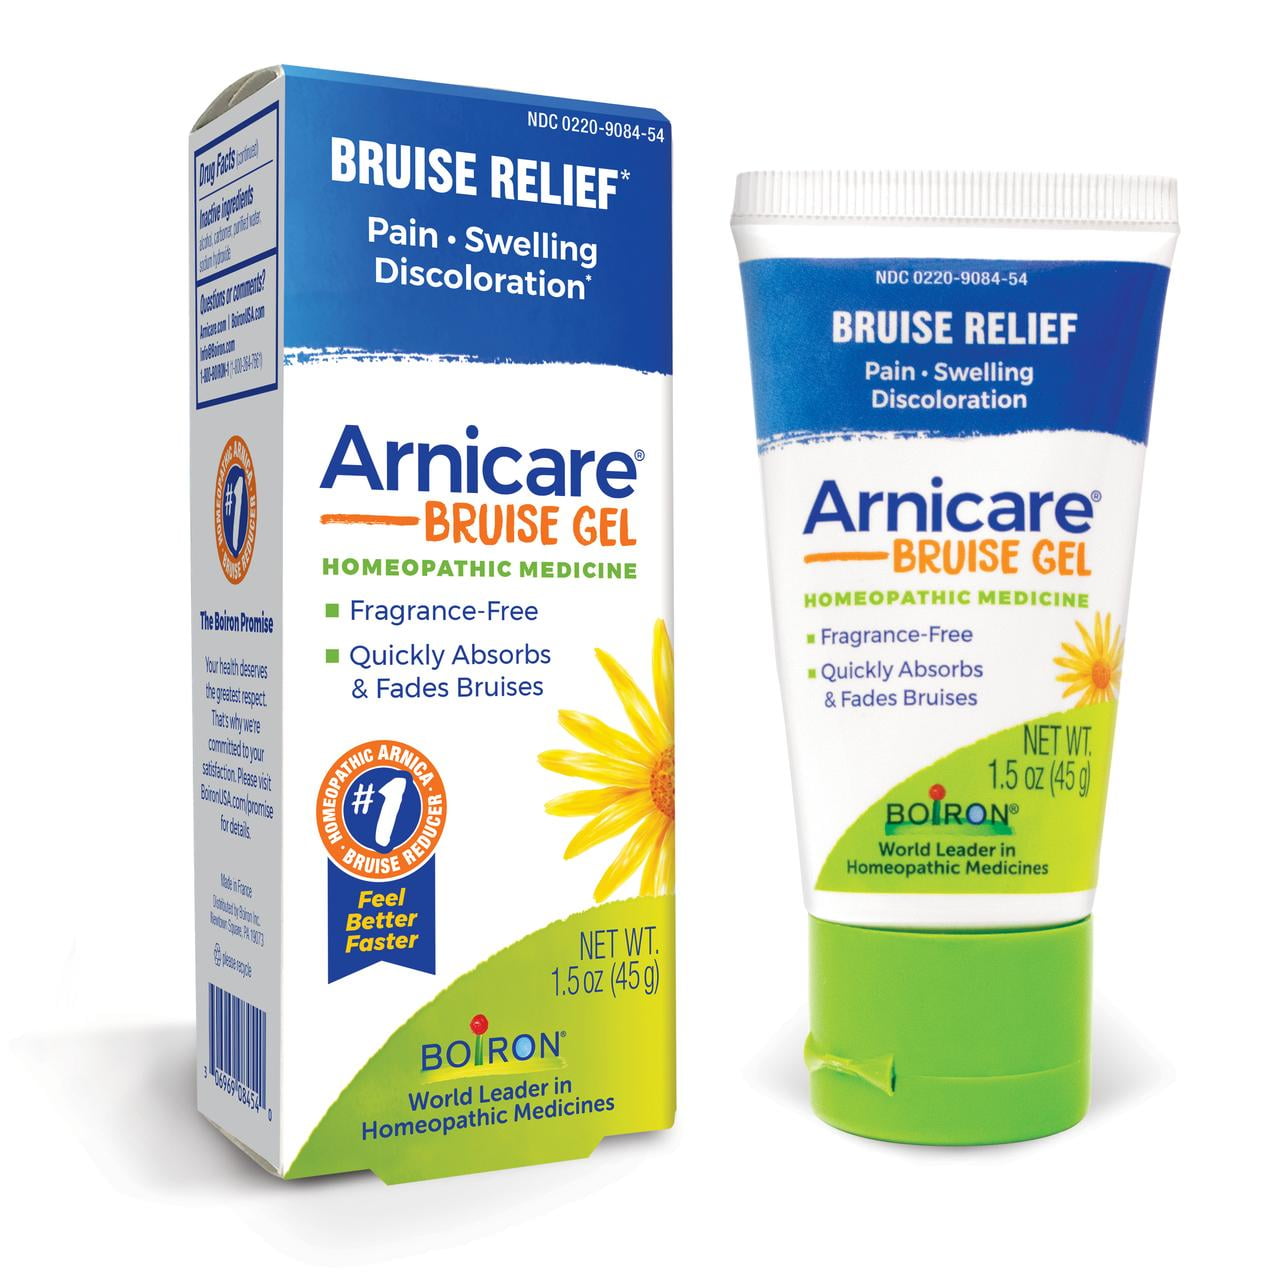 Boiron Arnicare Bruise Gel, Homeopathic Medicine for Bruise Relief, Pain, Swelling, Discoloration, 1.5 oz